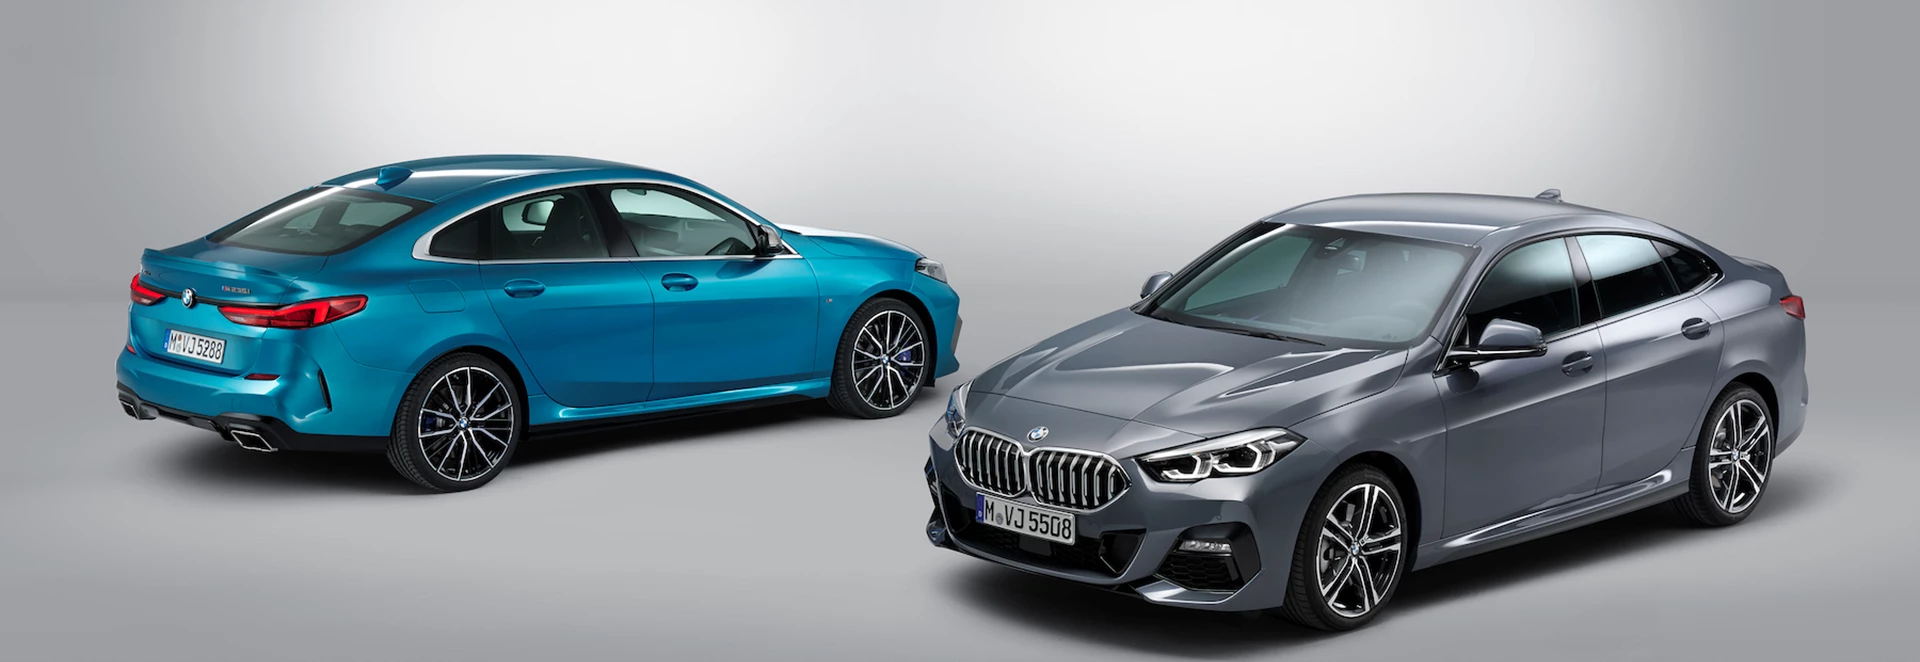 BMW unveils new 2 Series Gran Coupe 